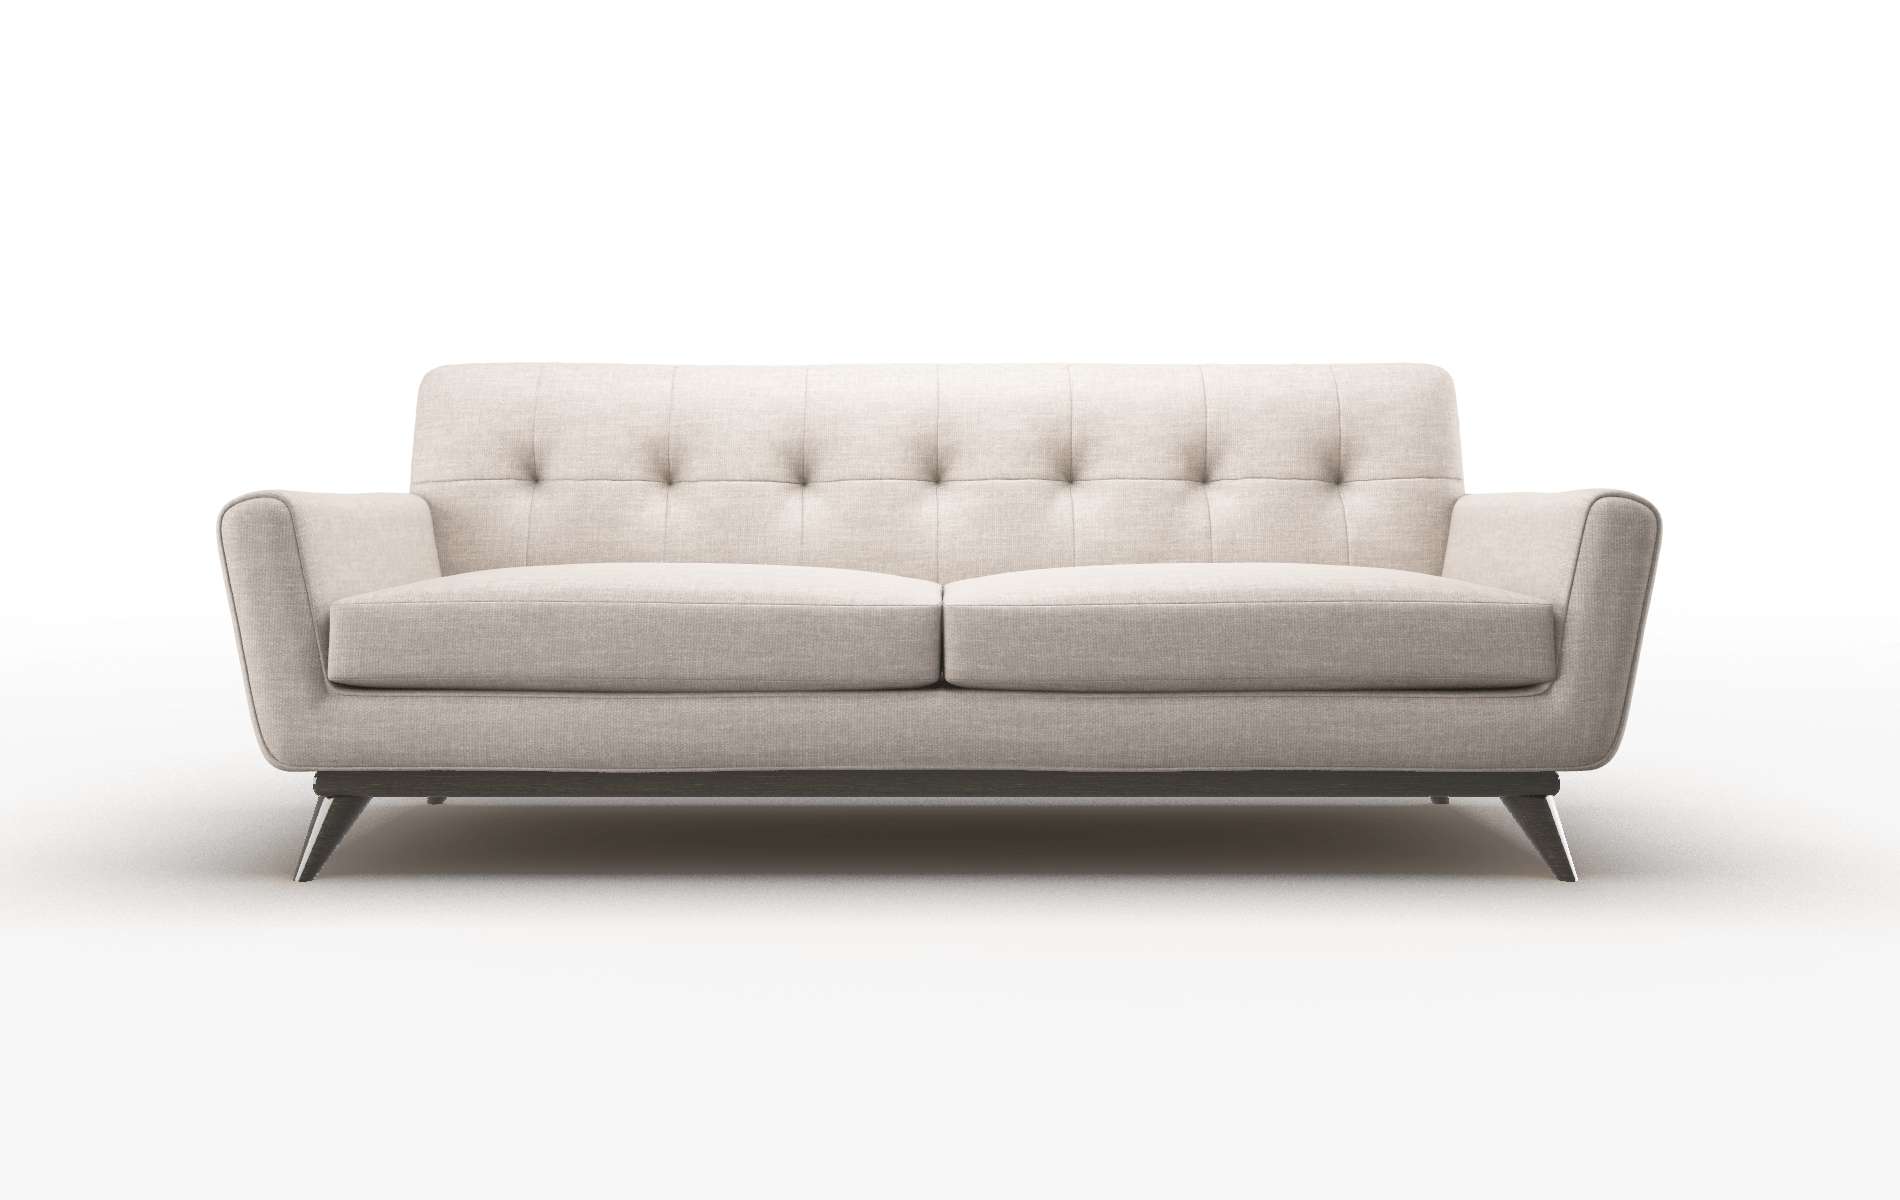 Brussels Clyde Dolphin Sofa espresso legs 1